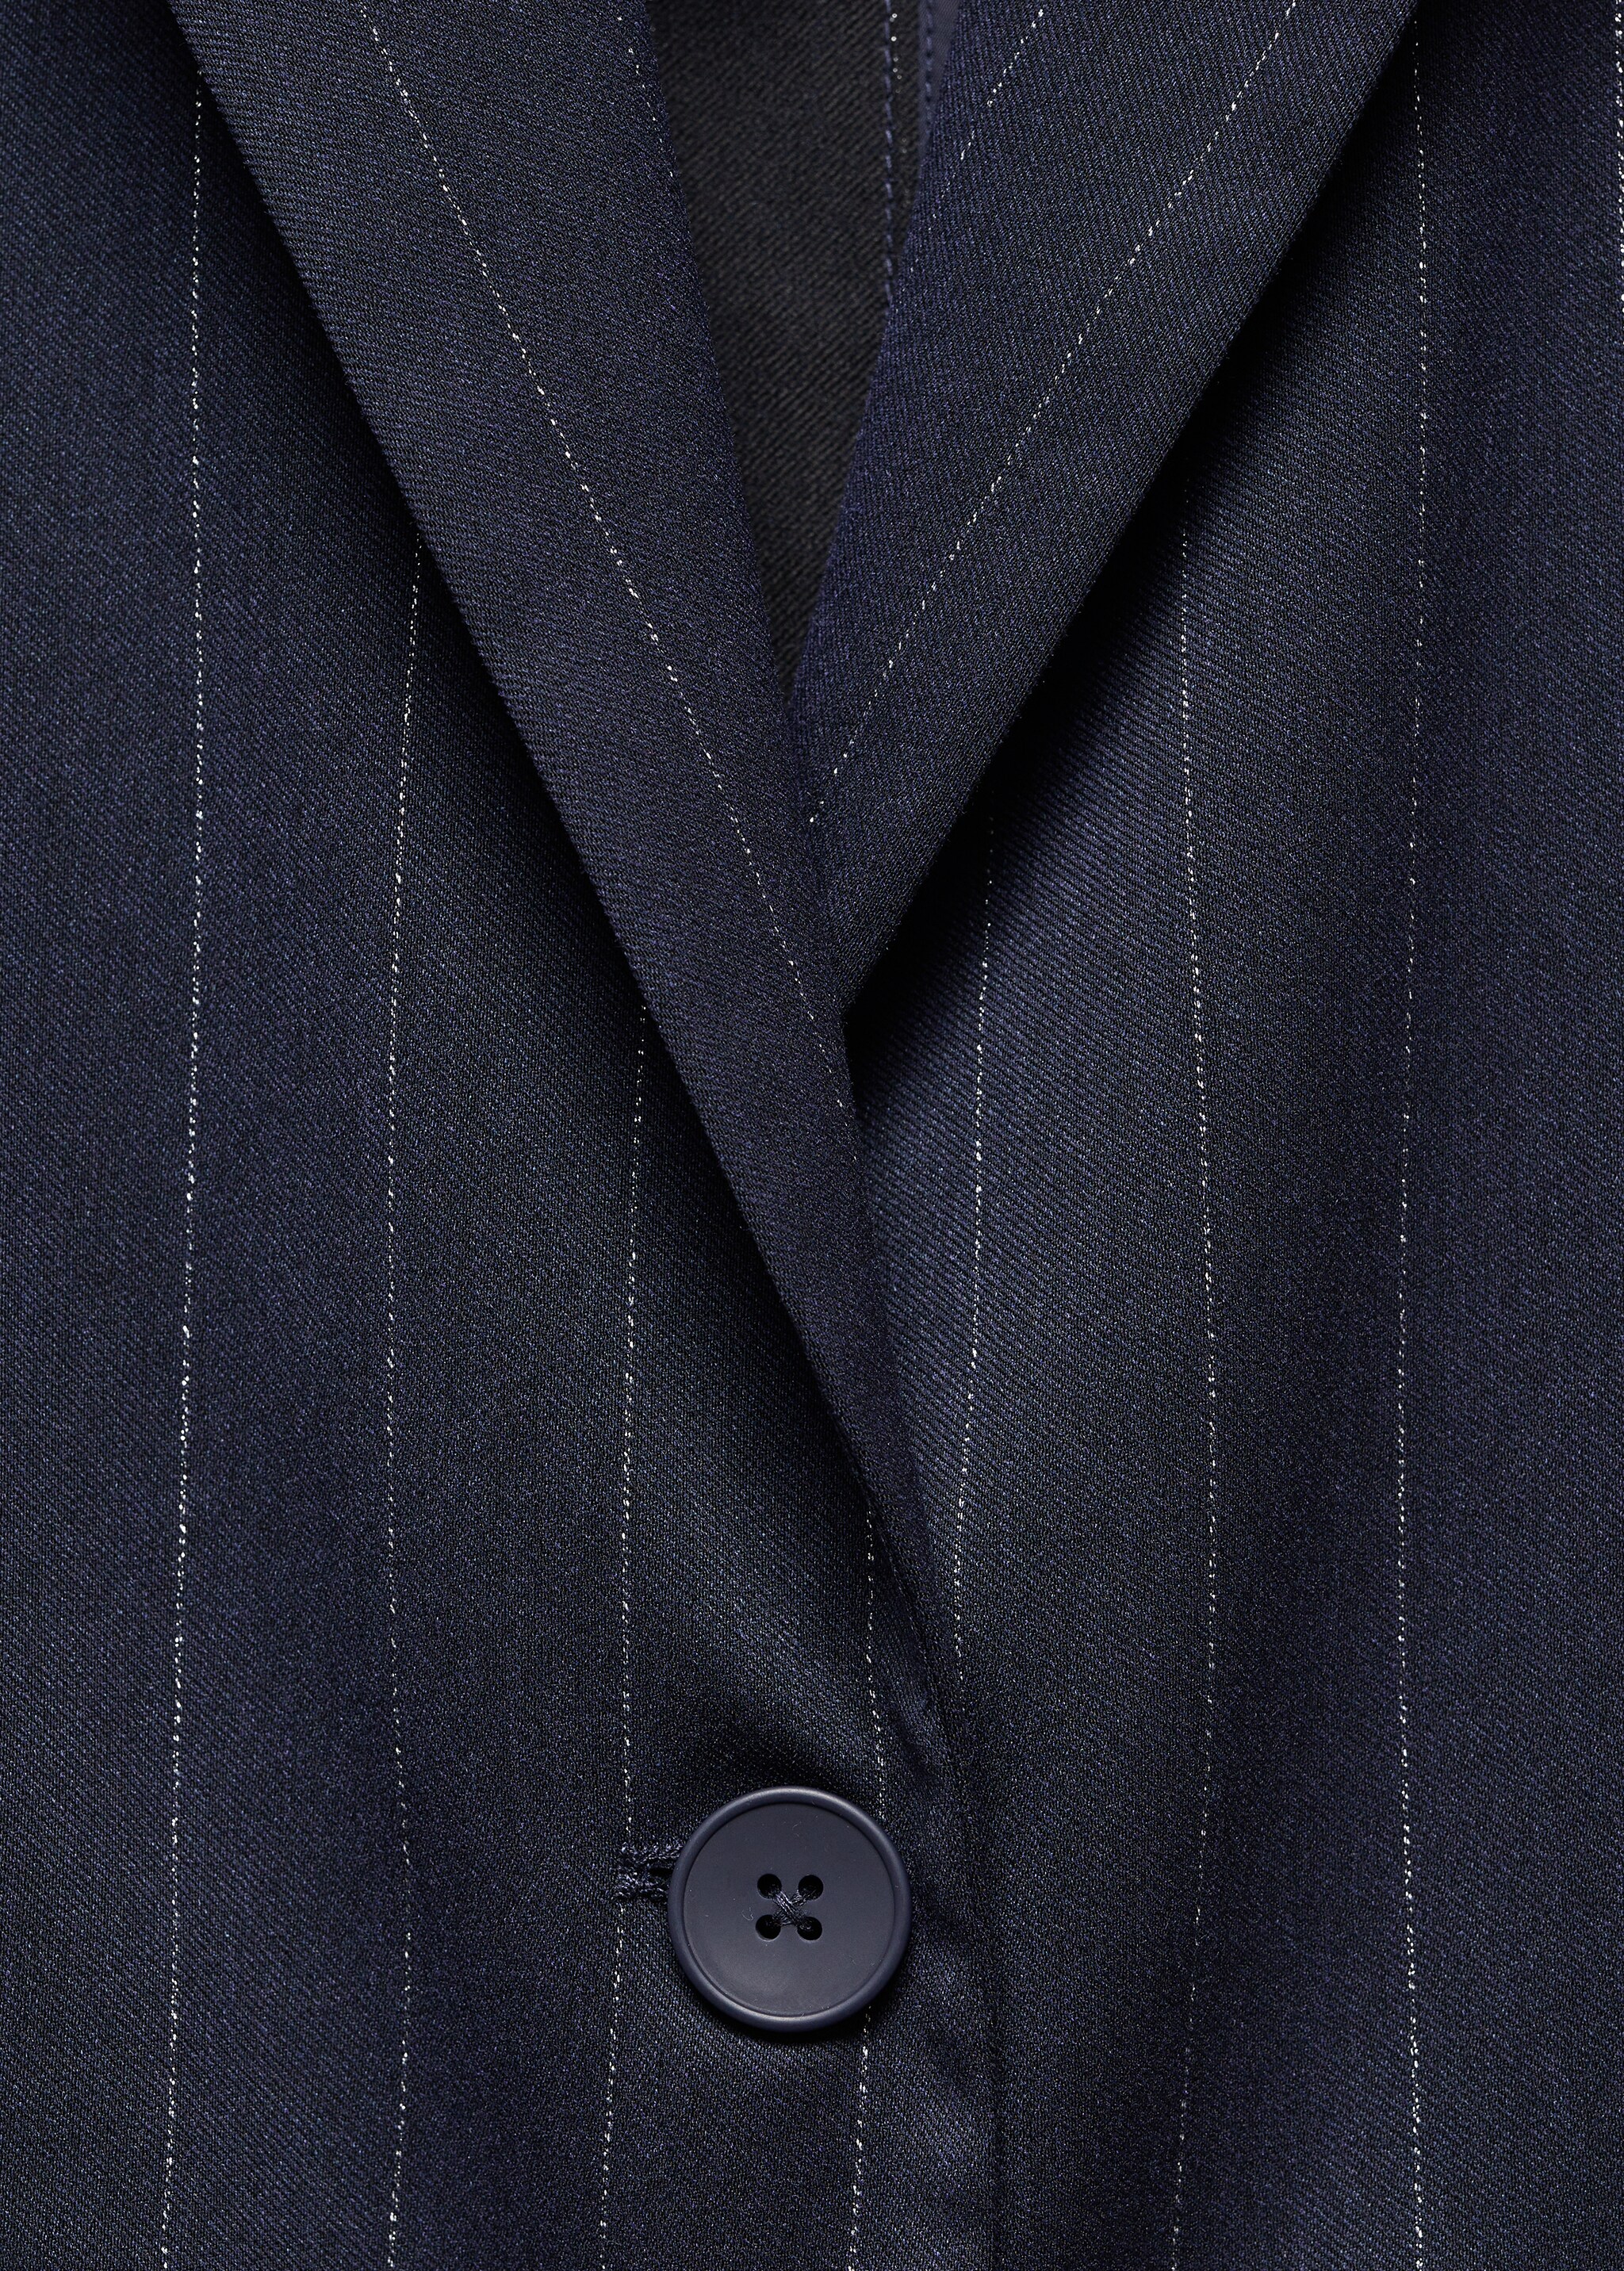 Pinstripe blazer - Details of the article 8